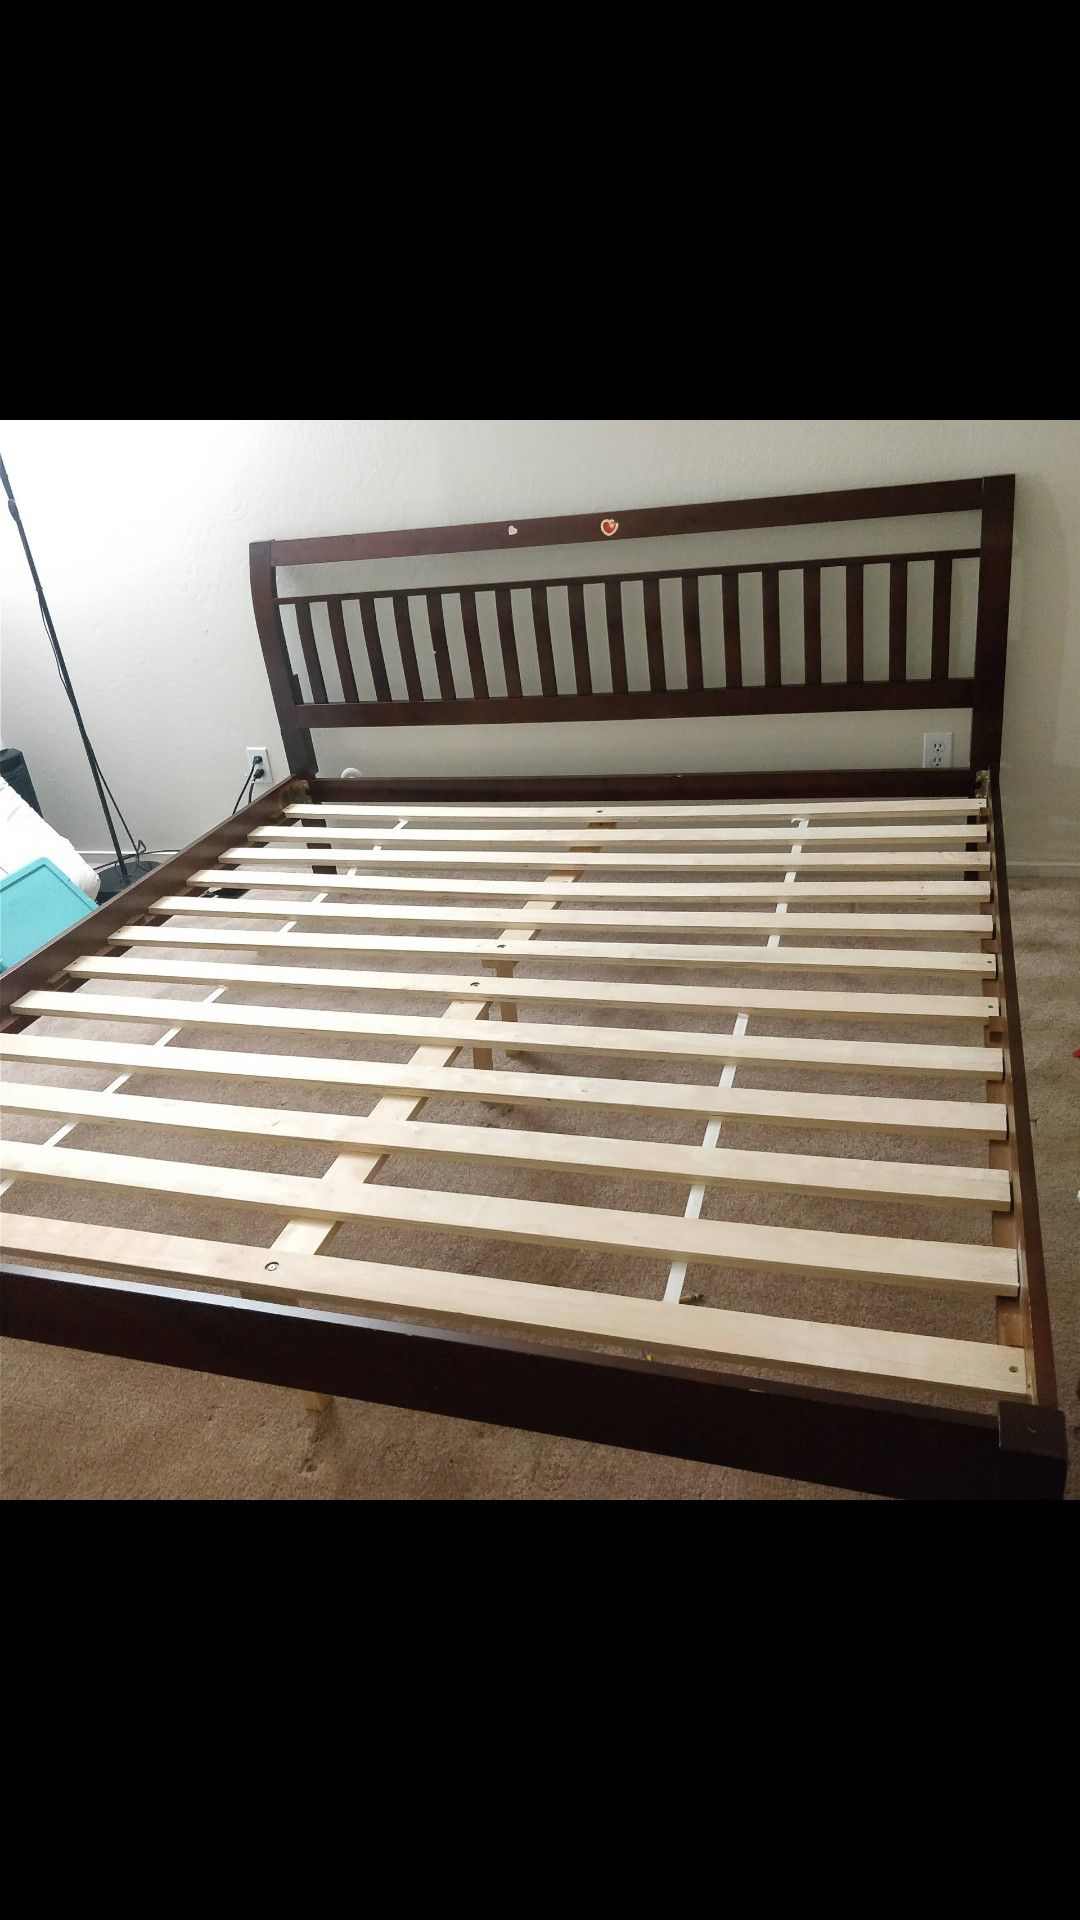 Cal king ikea bed frame in good condition.